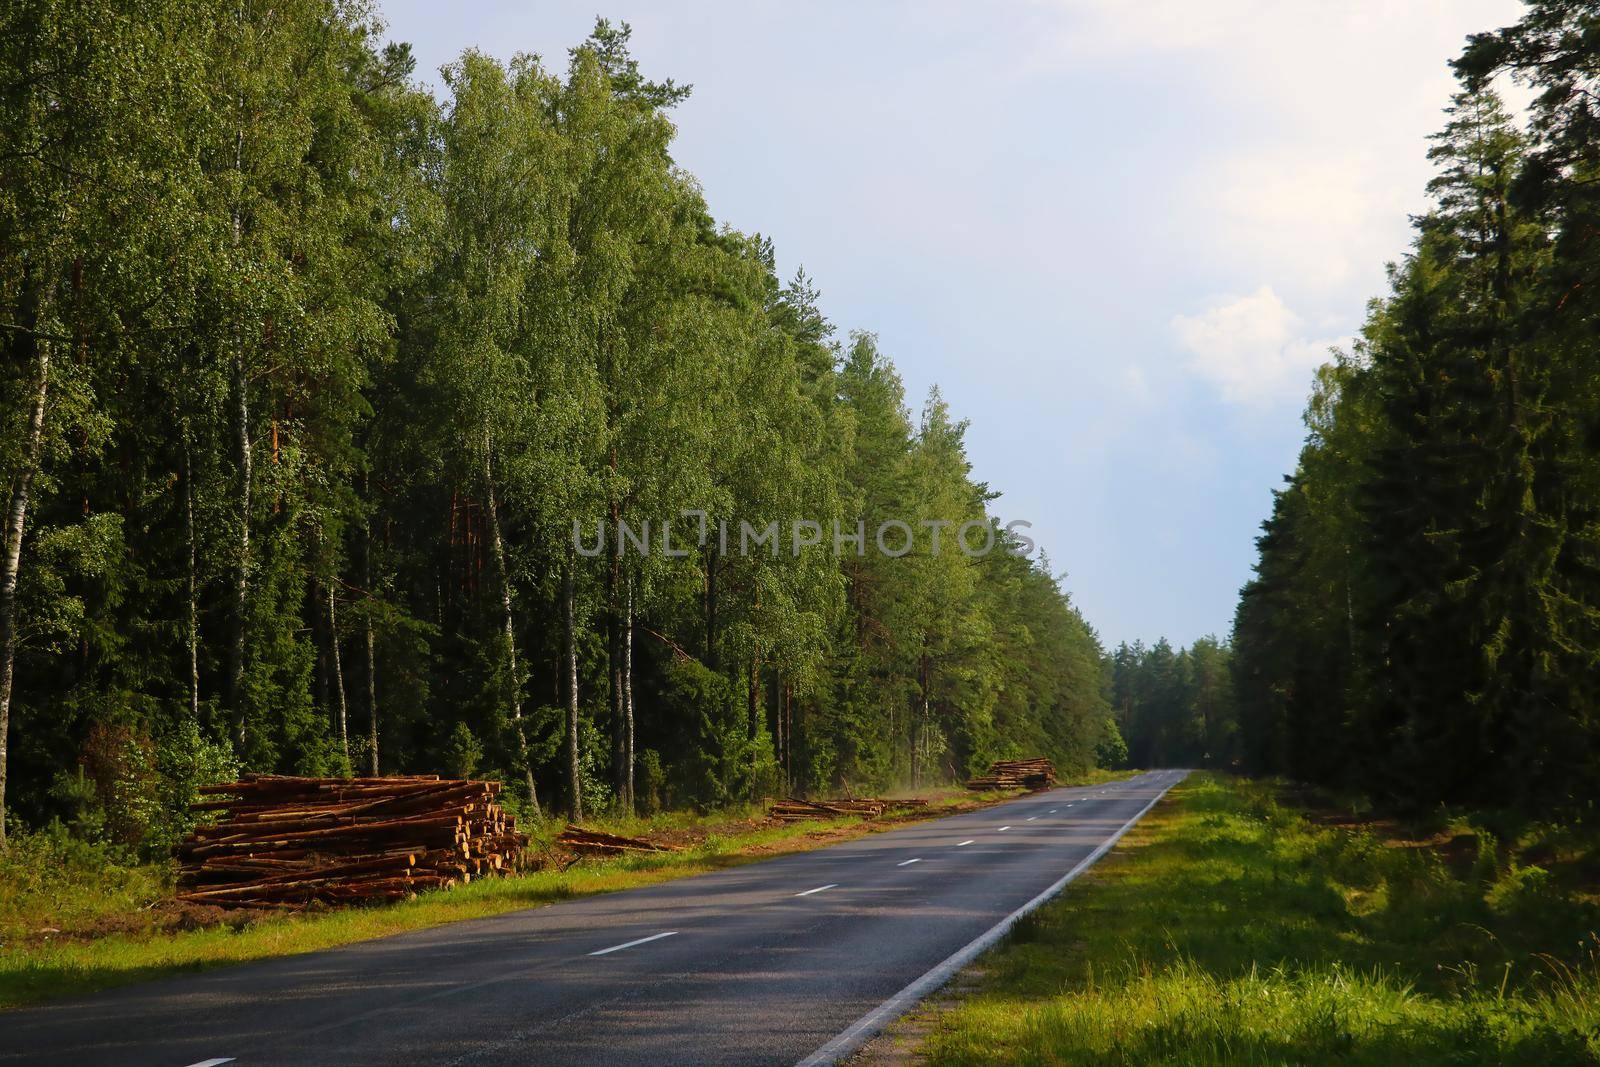 Wet road after rain along the green forest. by kip02kas